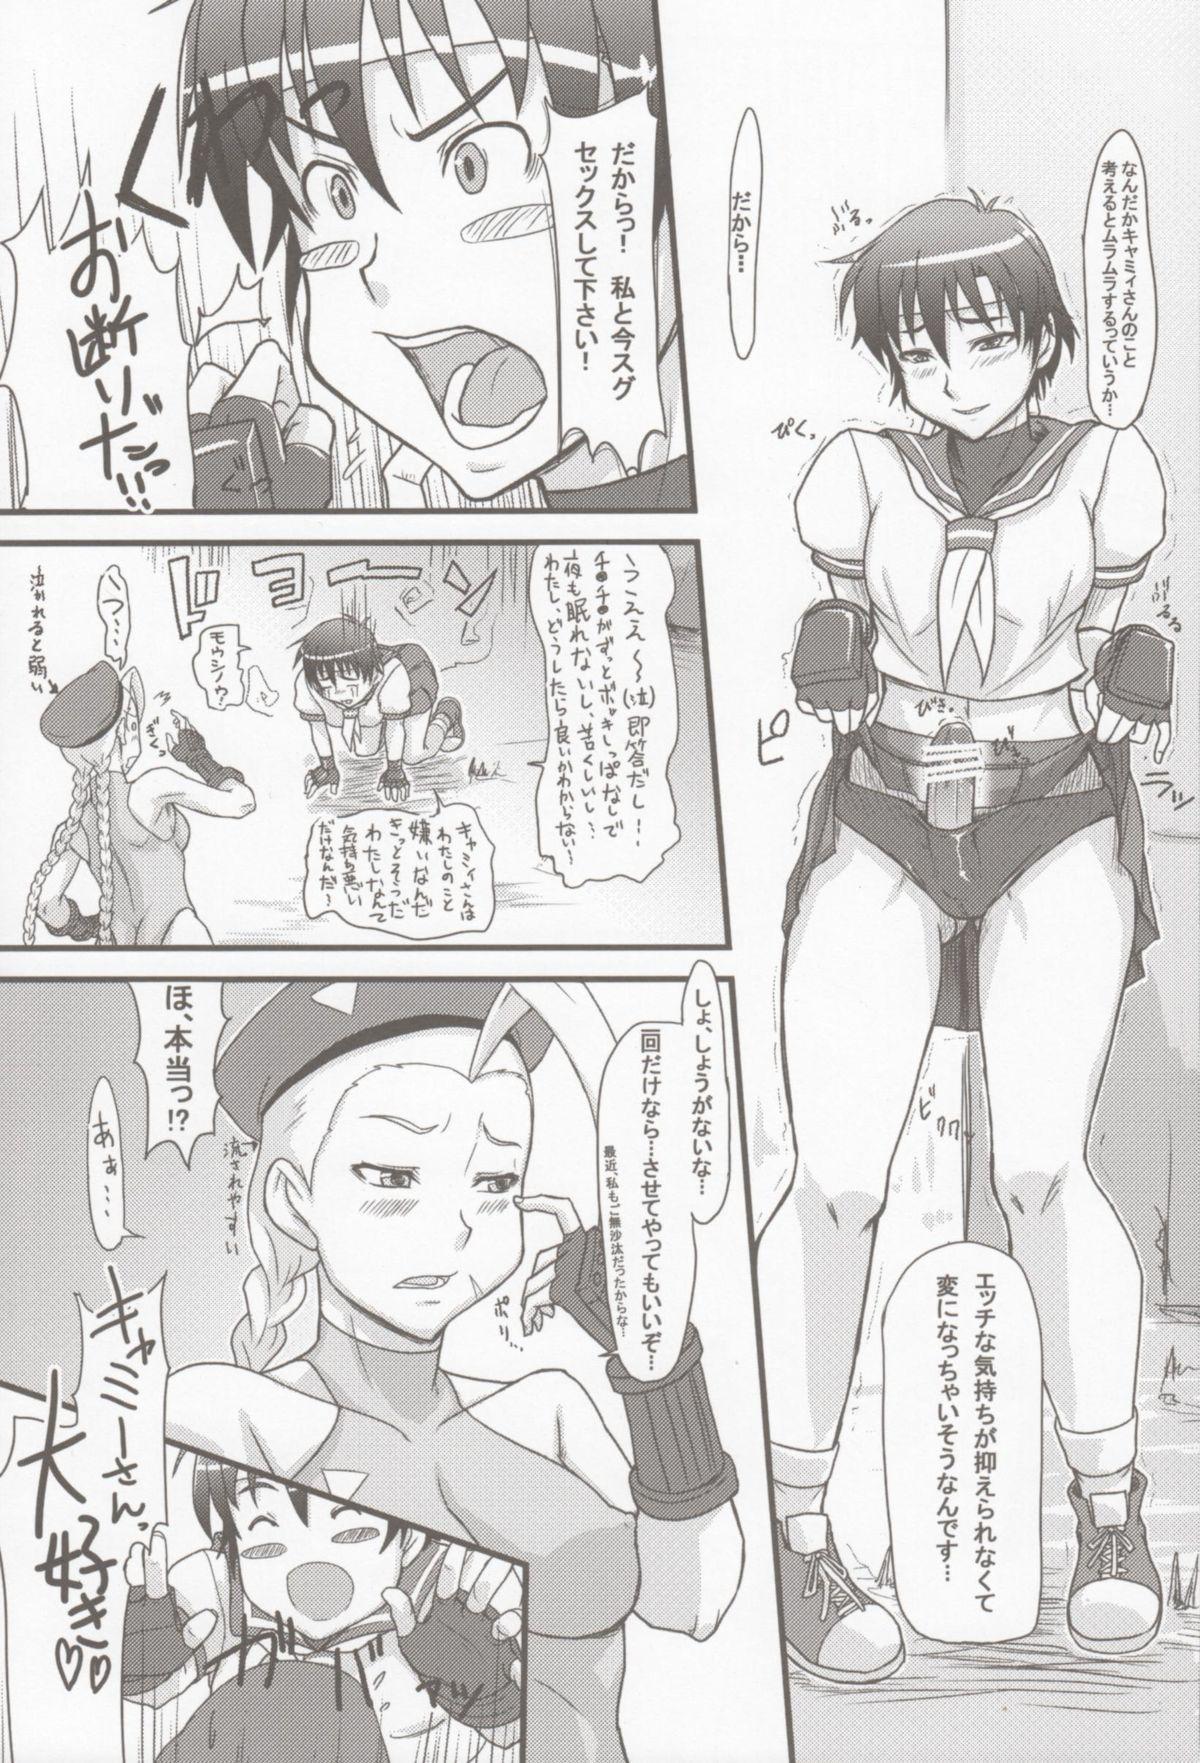 Whores Cammy Saku! Fighter Material Vol. 2 - Street fighter Nasty Porn - Page 8